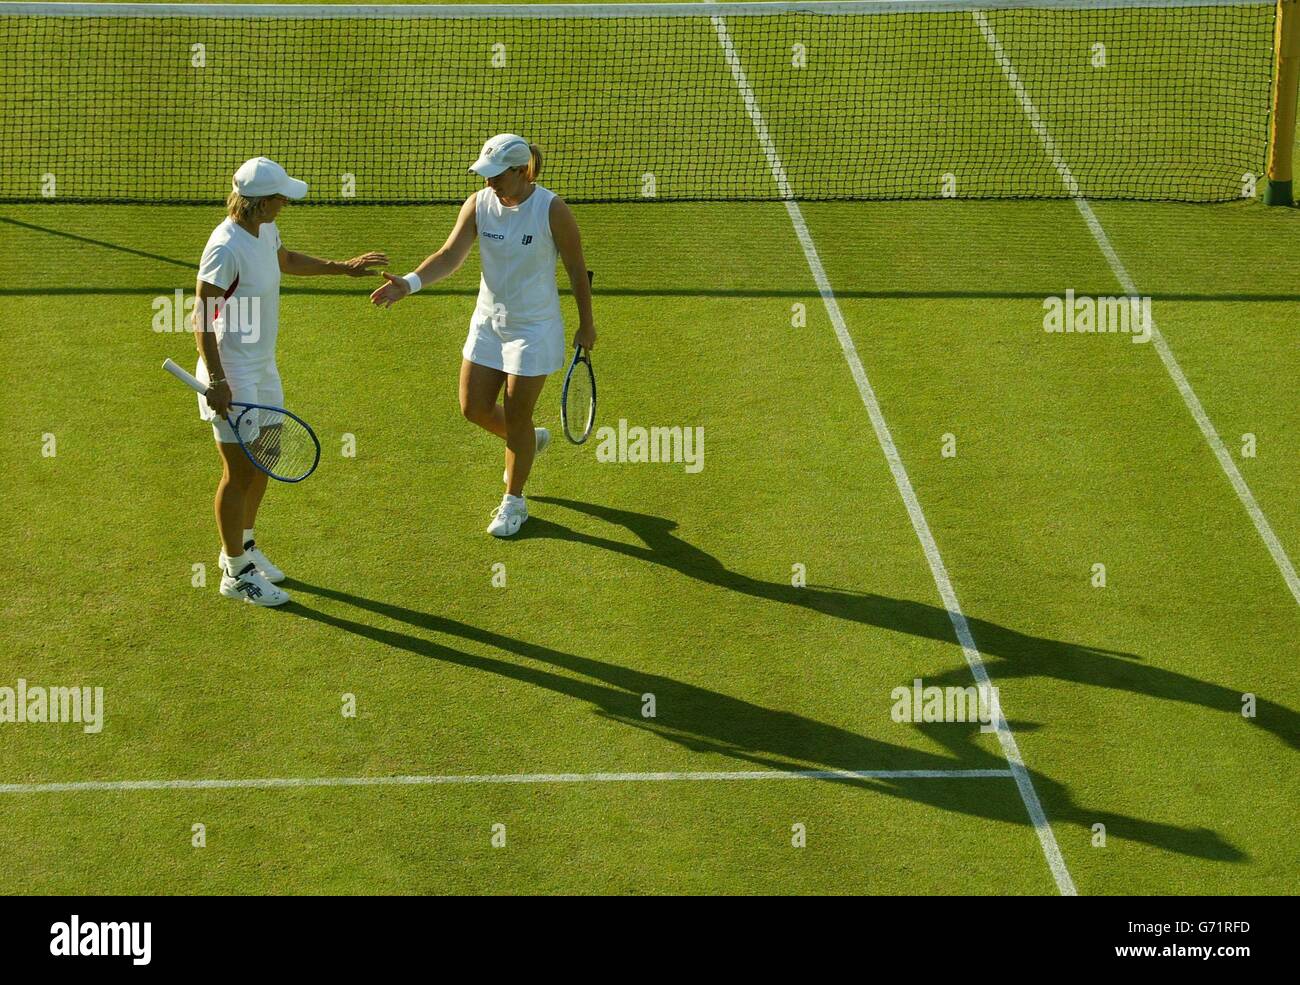 Martina Navratilova and Lisa Raymond from the USA celebrate a point in their doubles match against Jill Craybass and Marlene Weingartner at The Lawn Tennis Championships in Wimbledon, London. Navratilova and Raymond won in straight sets 6:2/6:4. Stock Photo